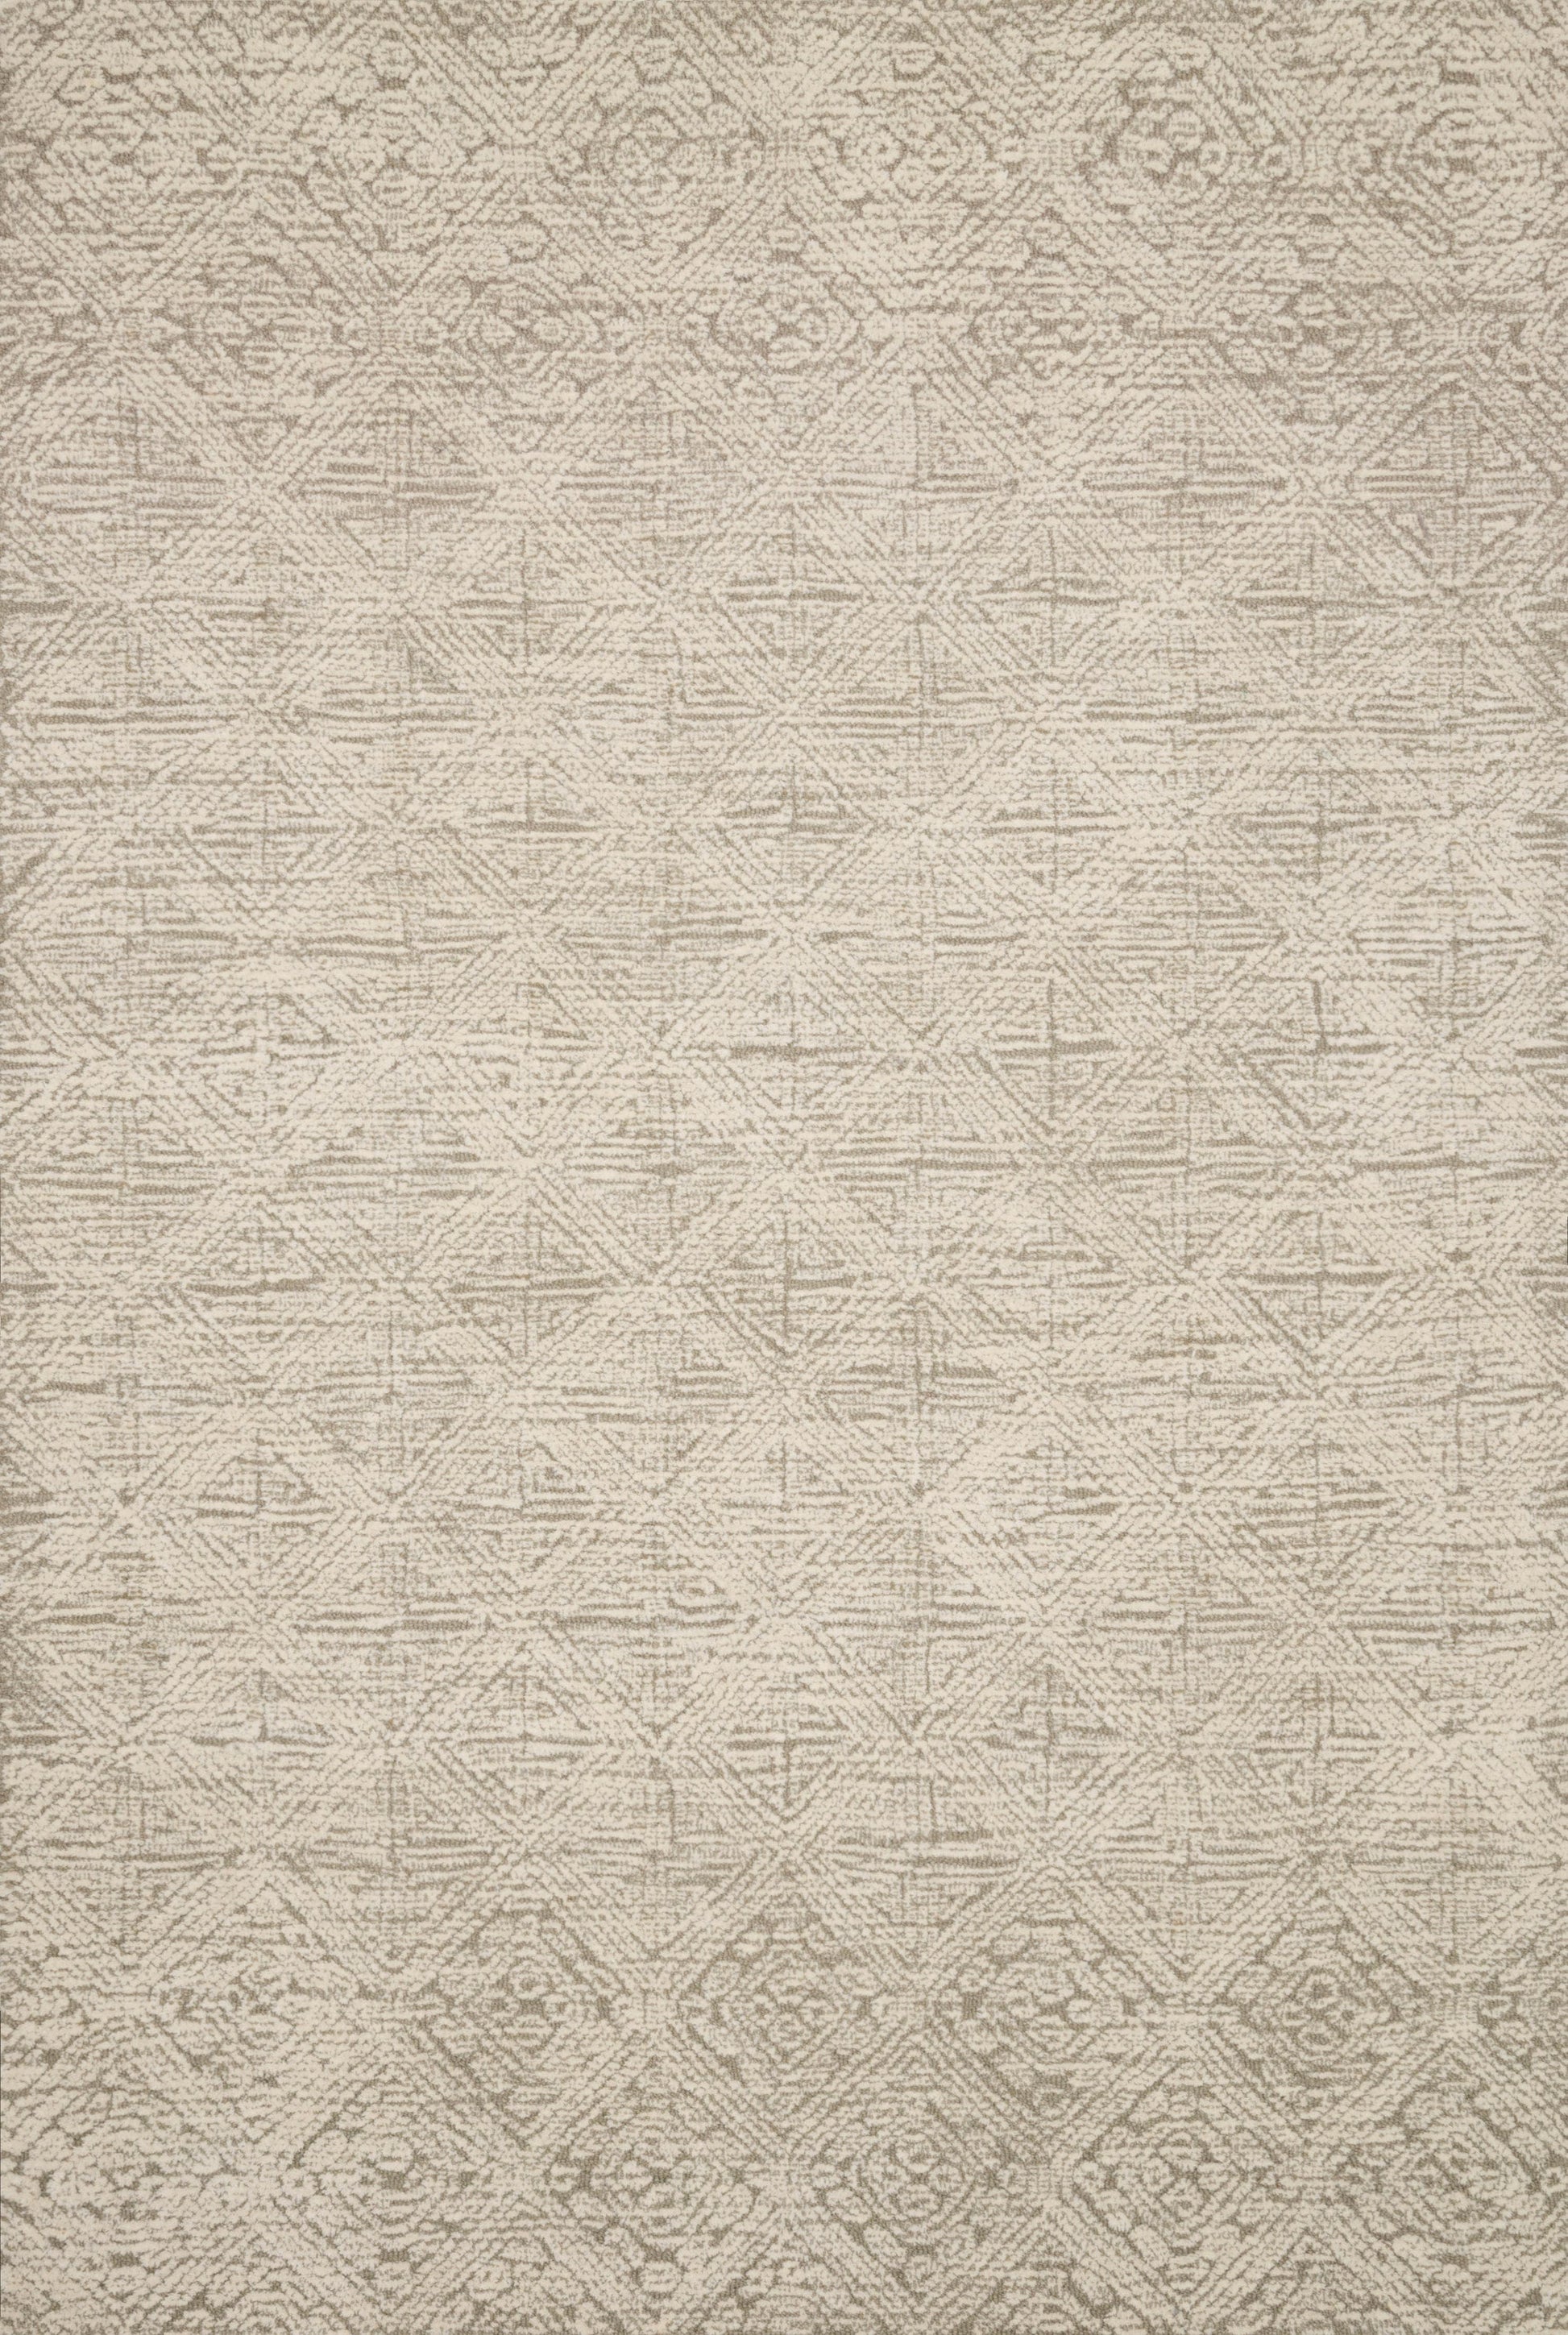 A picture of Loloi's Kopa rug, in style KO-03, color Taupe / Ivory